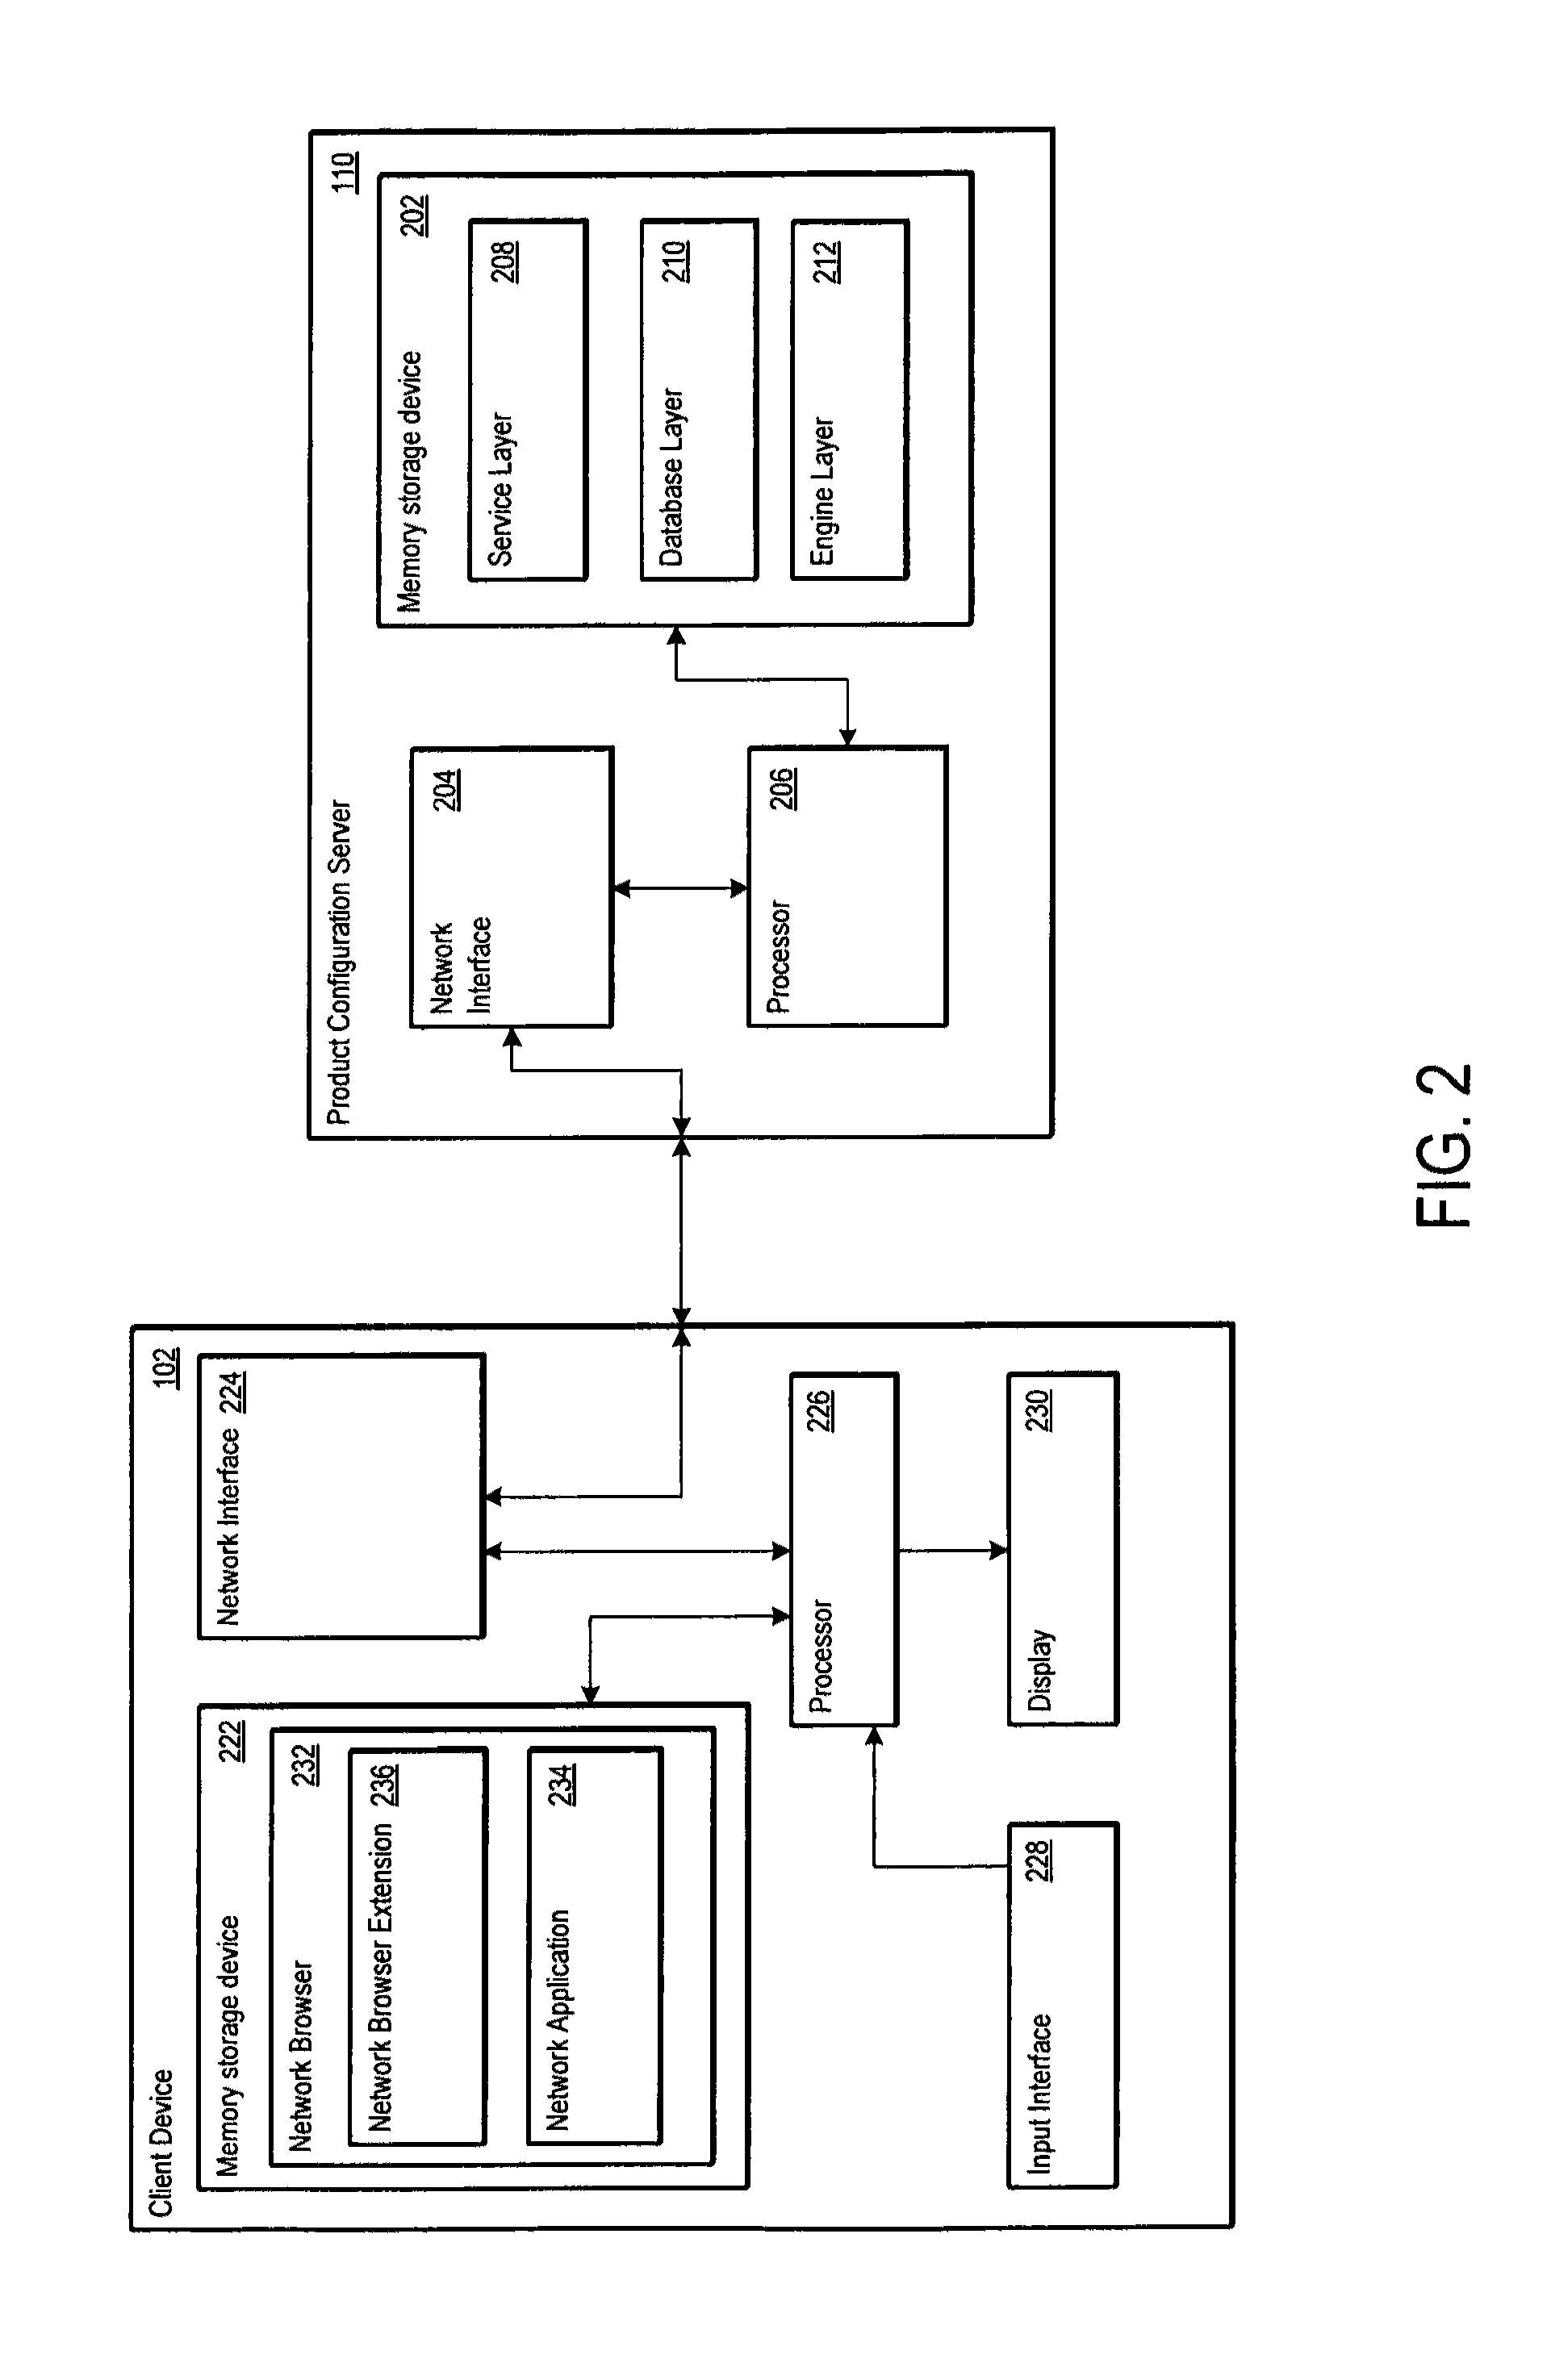 Product configuration server for efficiently displaying selectable attribute values for configurable products